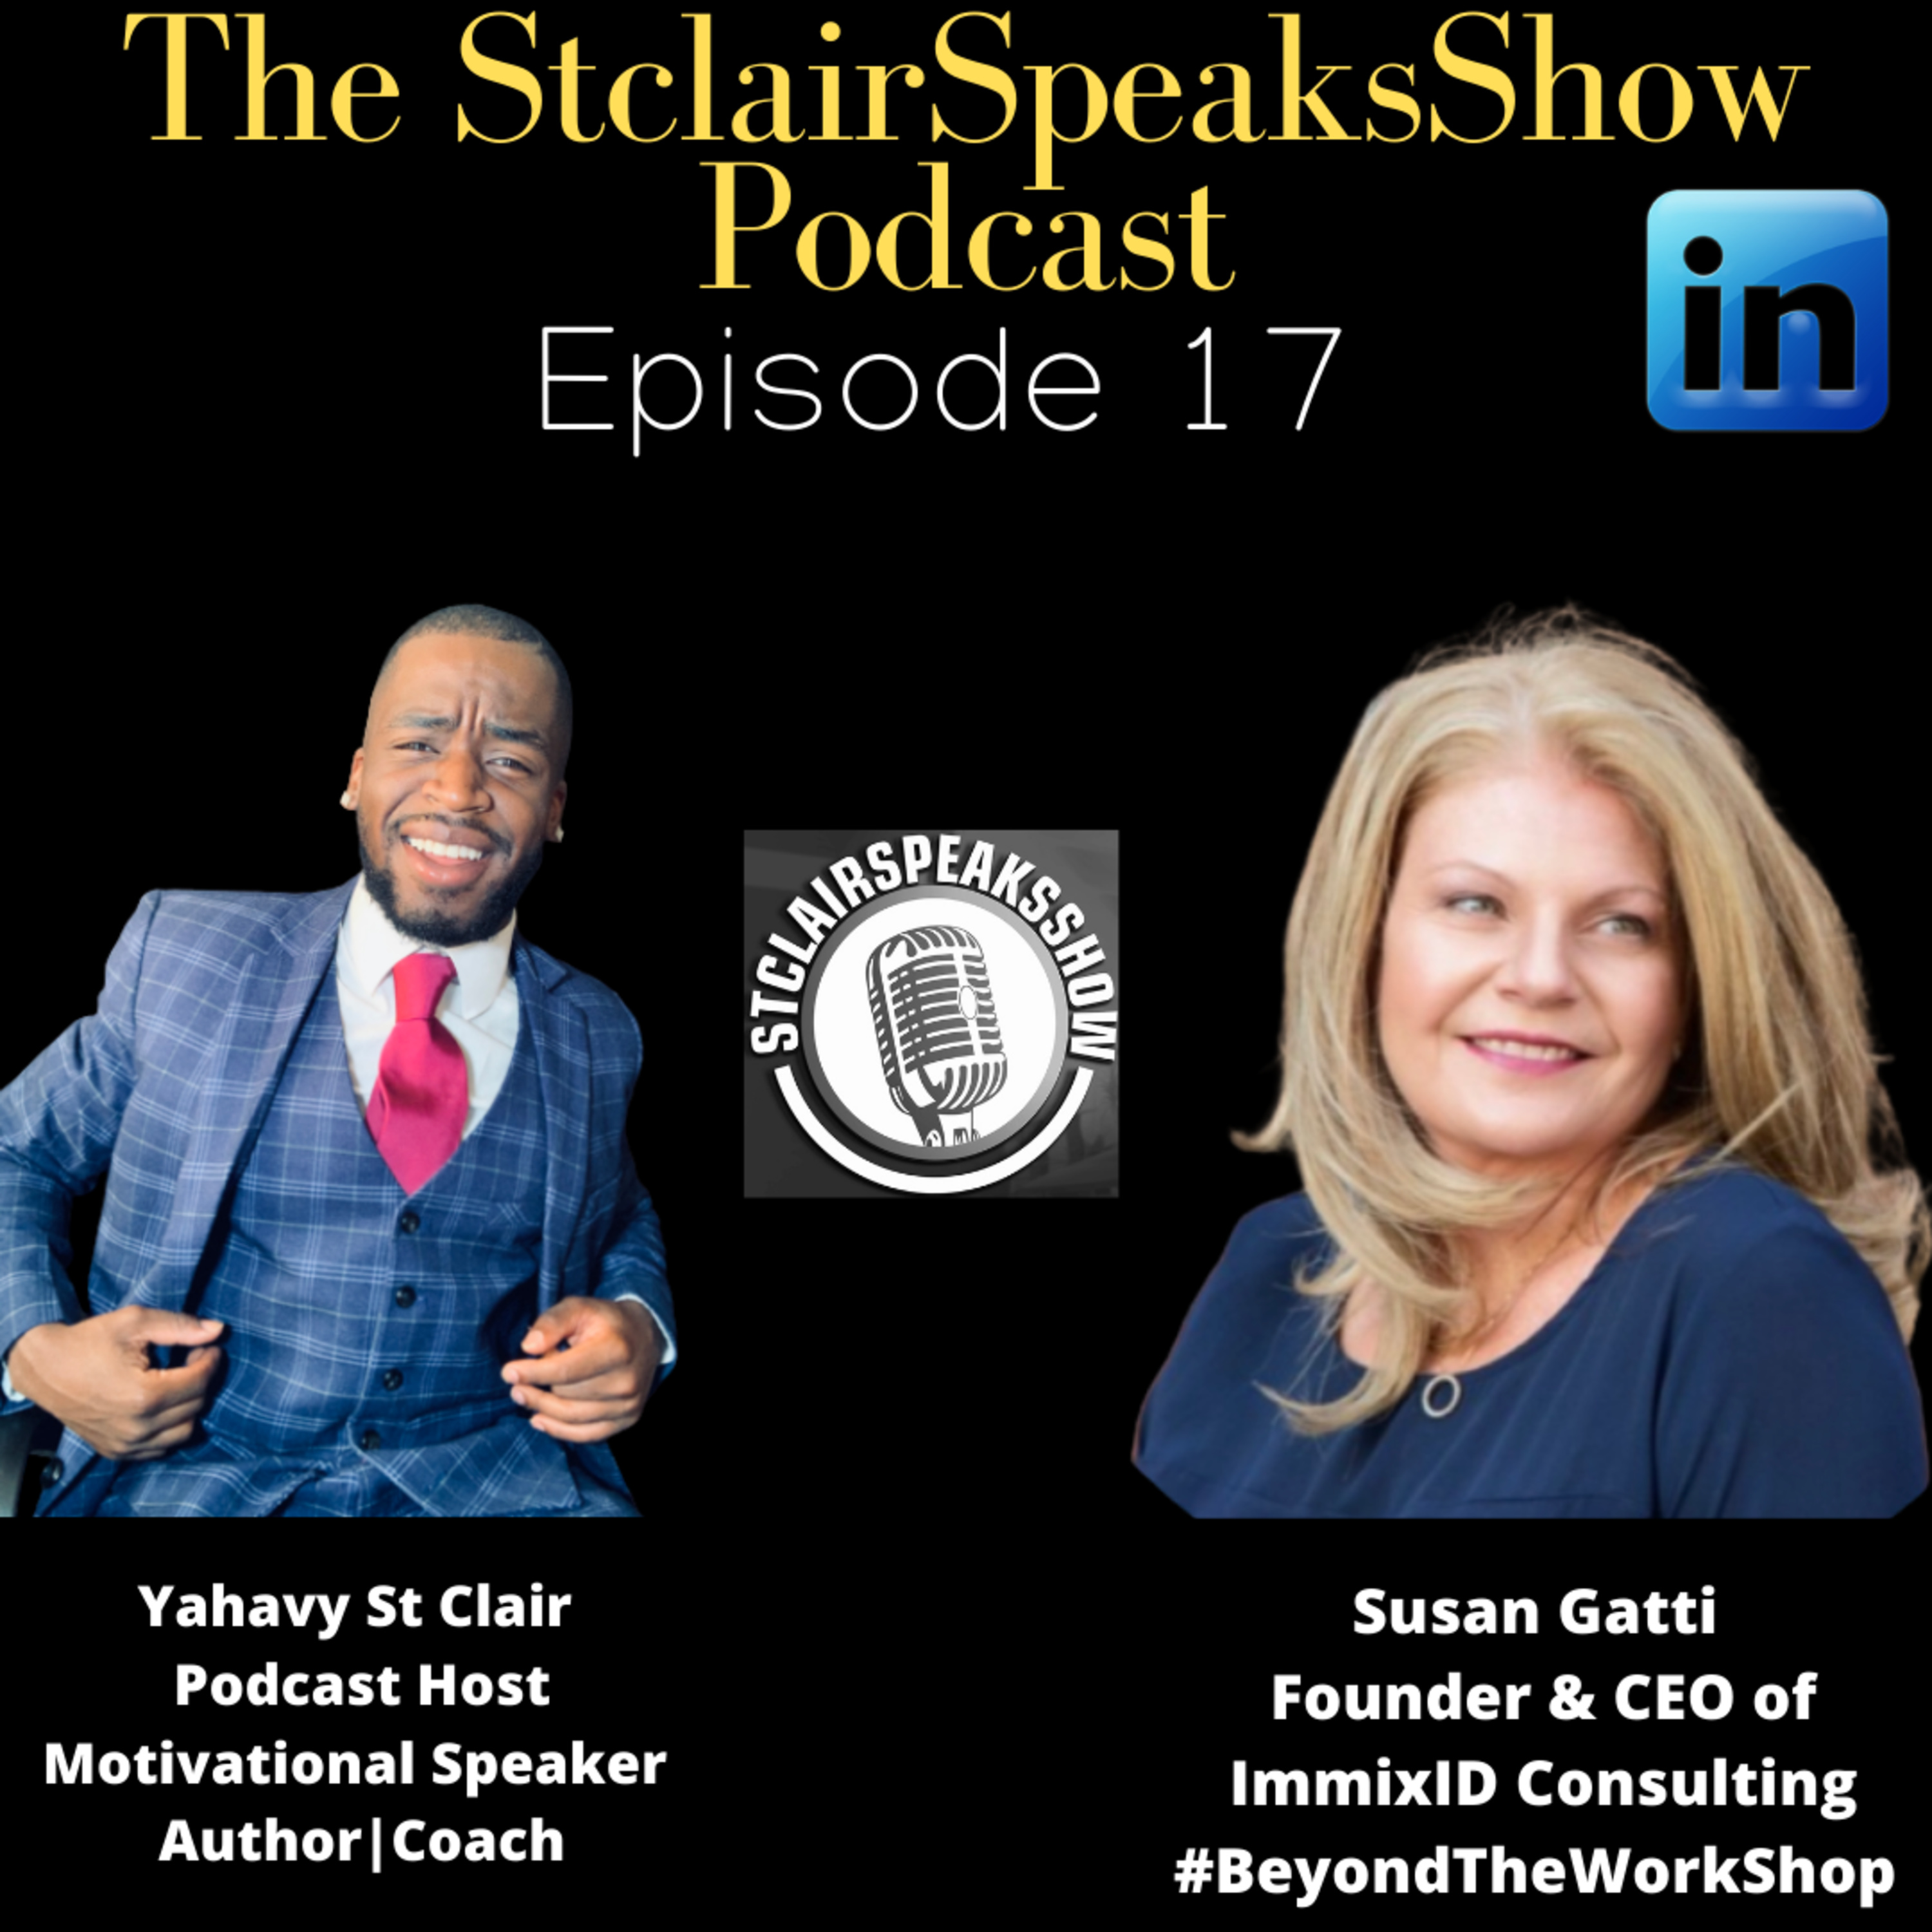 The StclairSpeaksShow Podcast Featuring Susan Gatti CEO & Founder of ImmixID Consulting